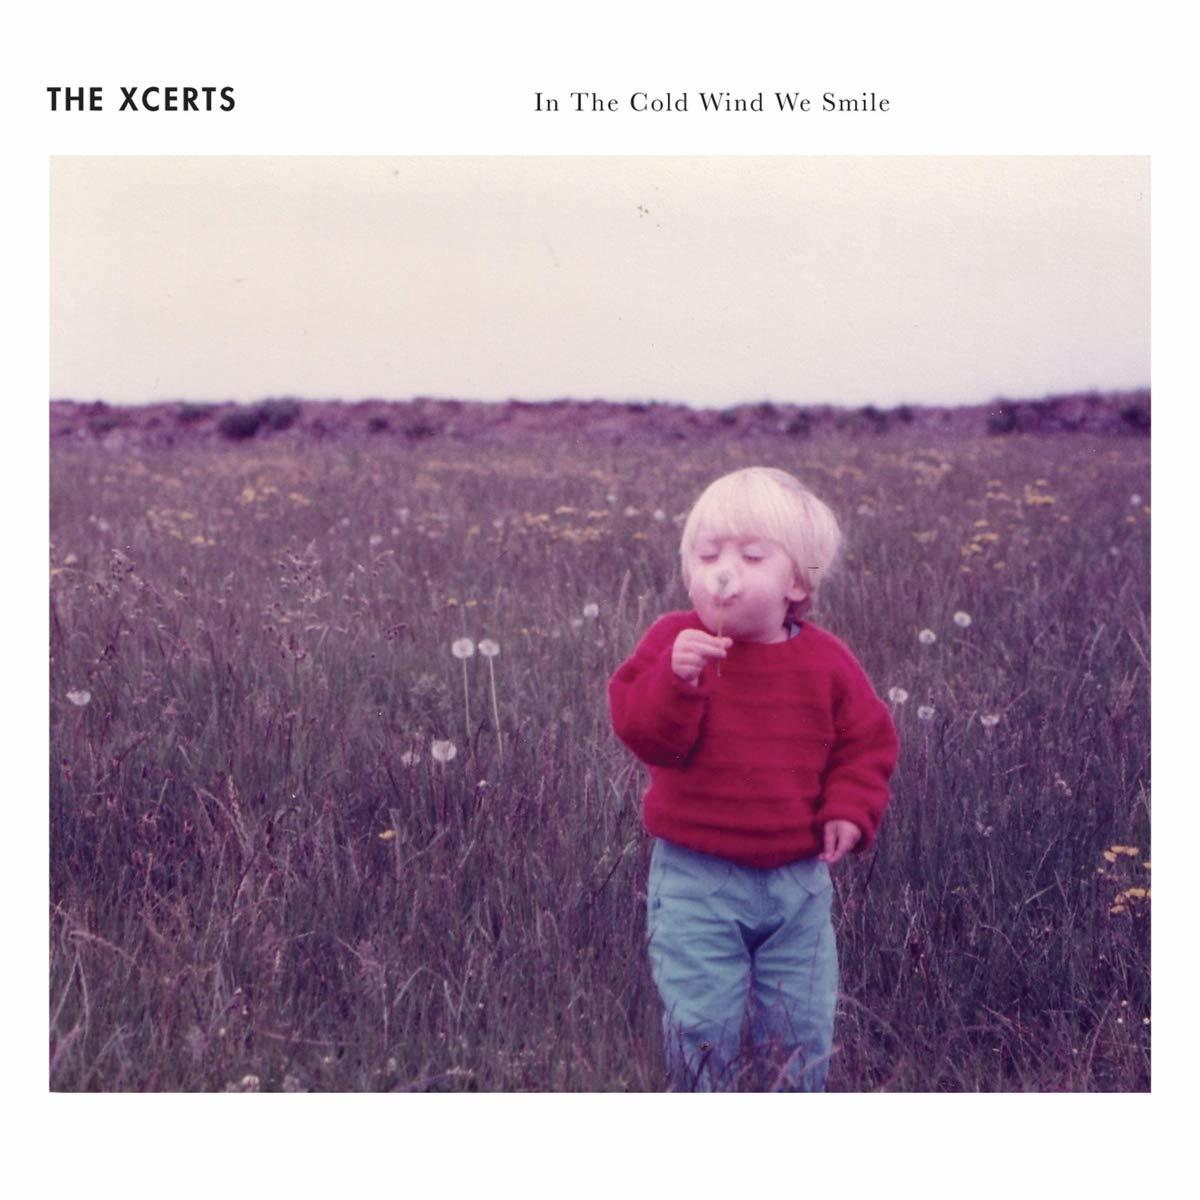 The Xcerts - Wind - The In (CD) We Cold Smile